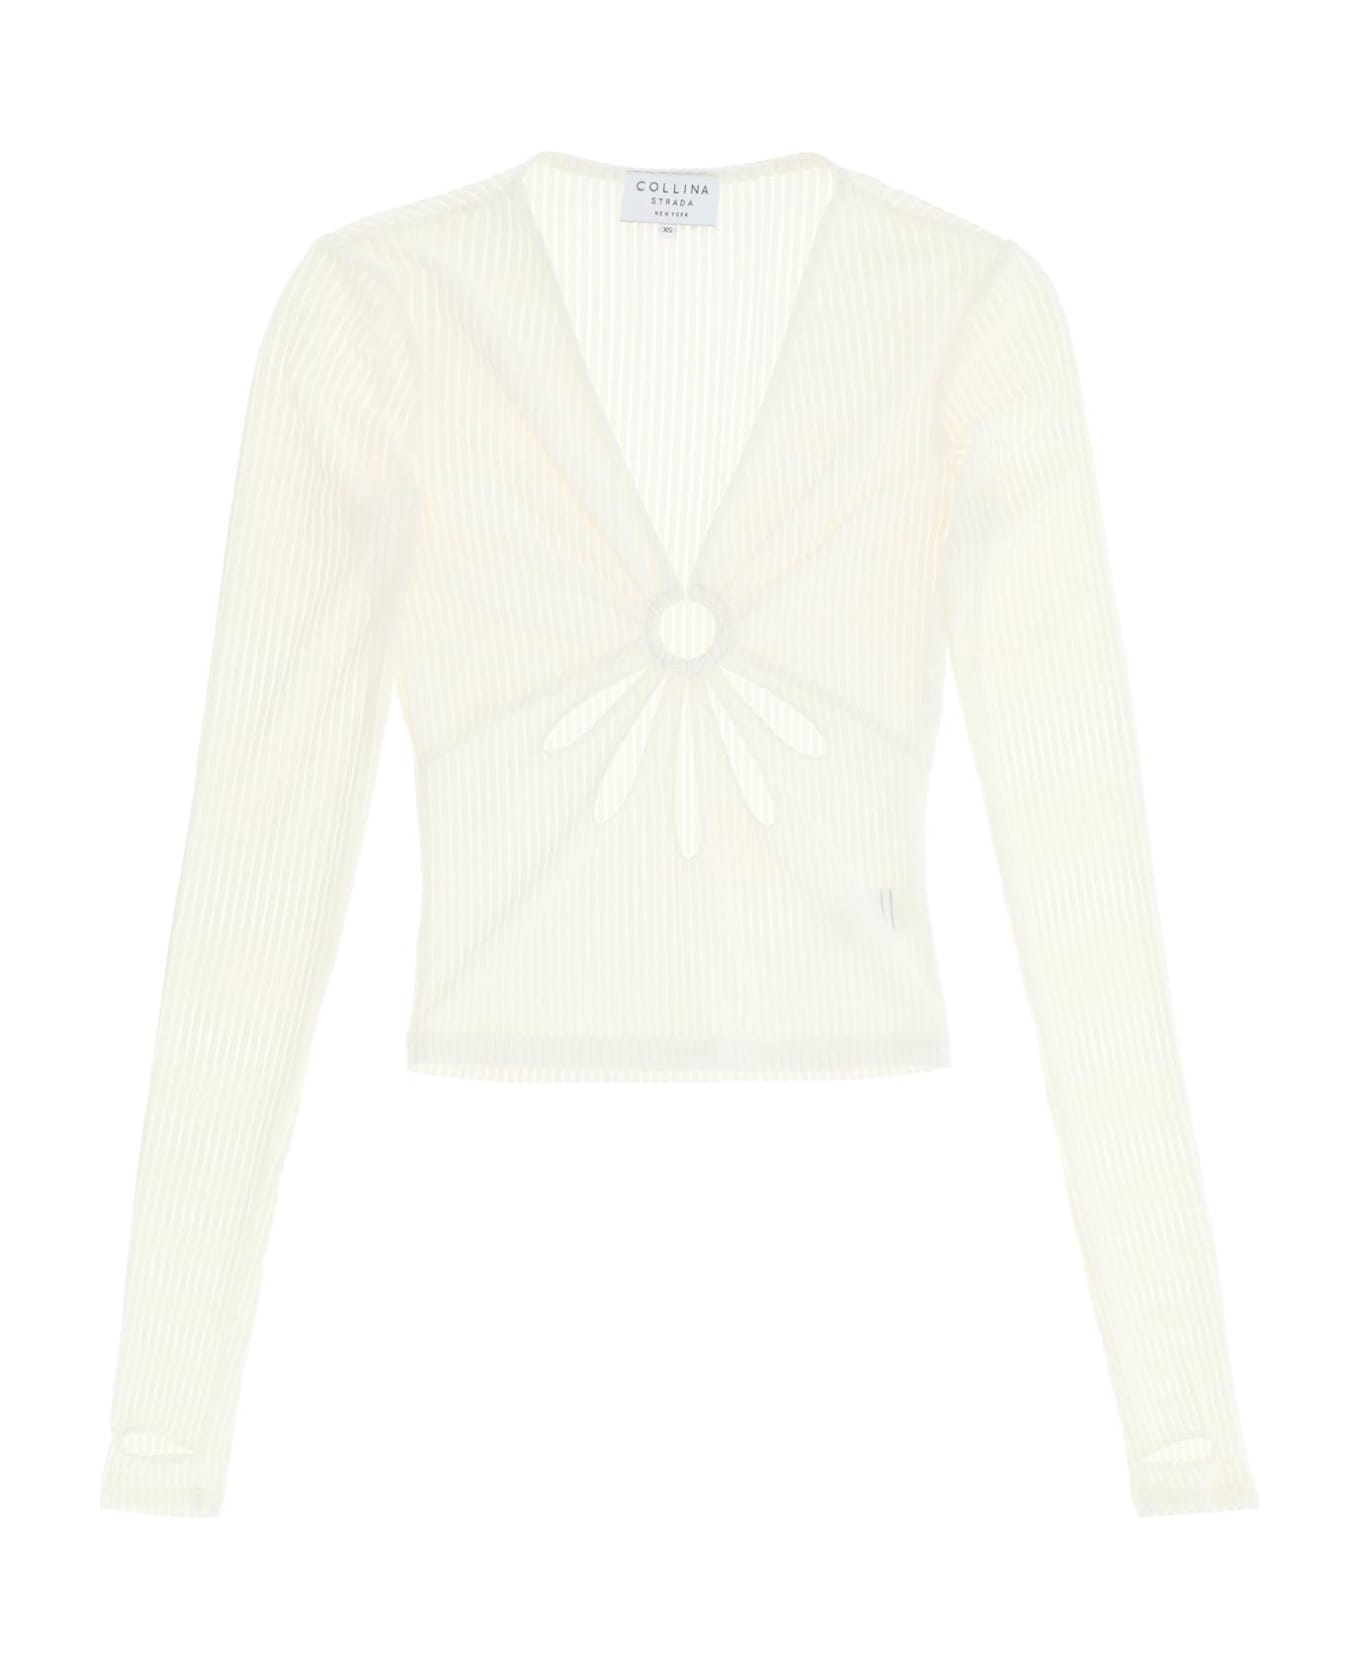 Collina Strada 'flower' Top With Cut Outs - SHEERSUCKER (White)